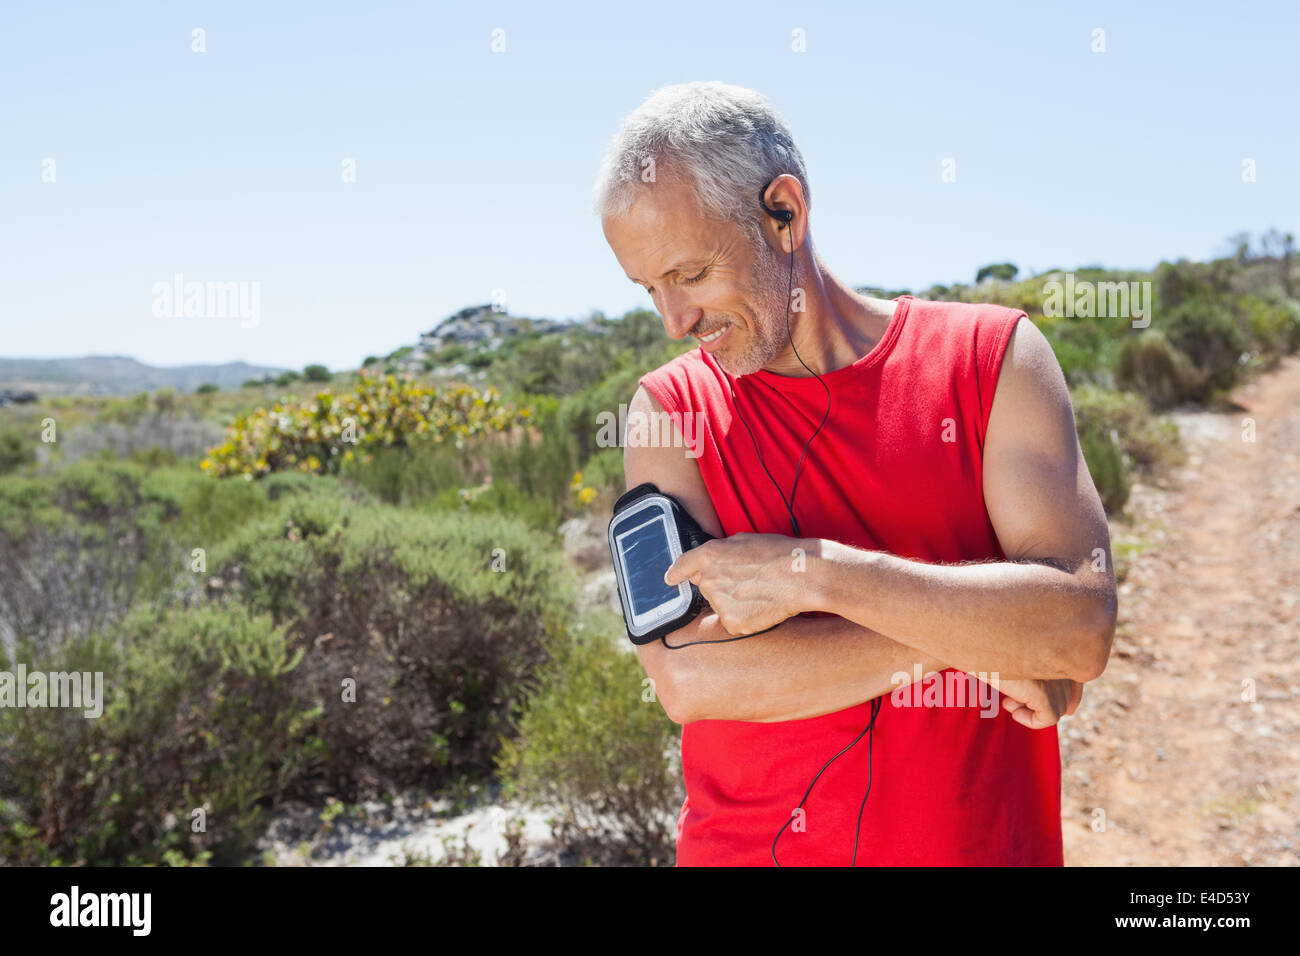 Fit man changing the song on his music player on mountain trail Stock Photo